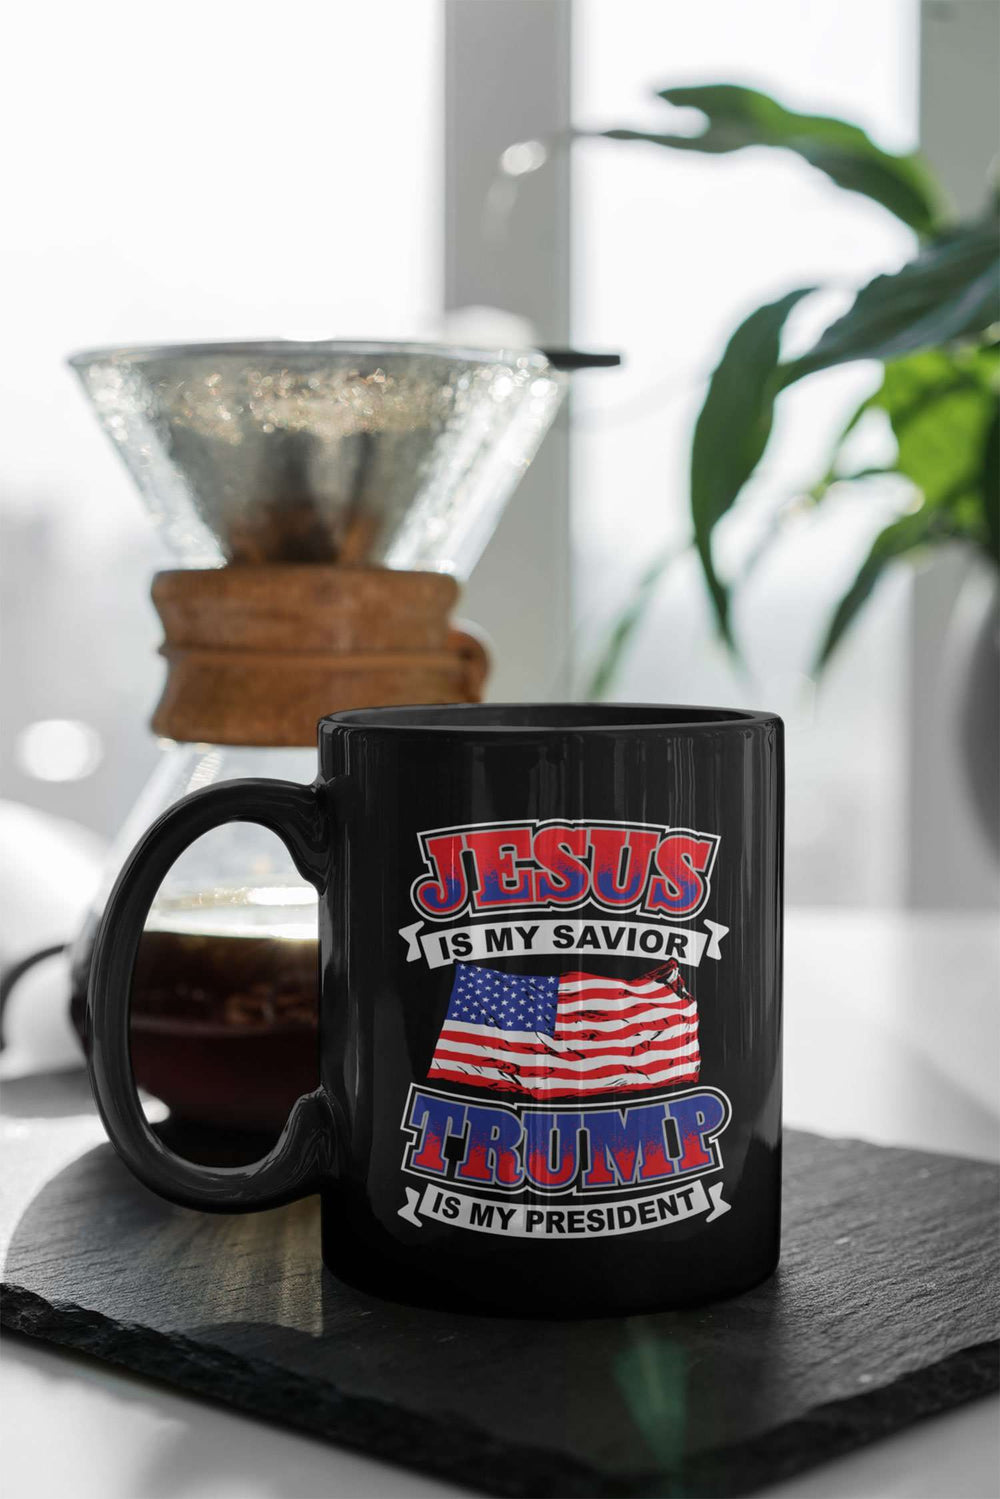 Designs by MyUtopia Shout Out:Jesus Is My Savior Trump Is My President Ceramic Coffee Mugs - Black,11 oz / Black,Ceramic Coffee Mug